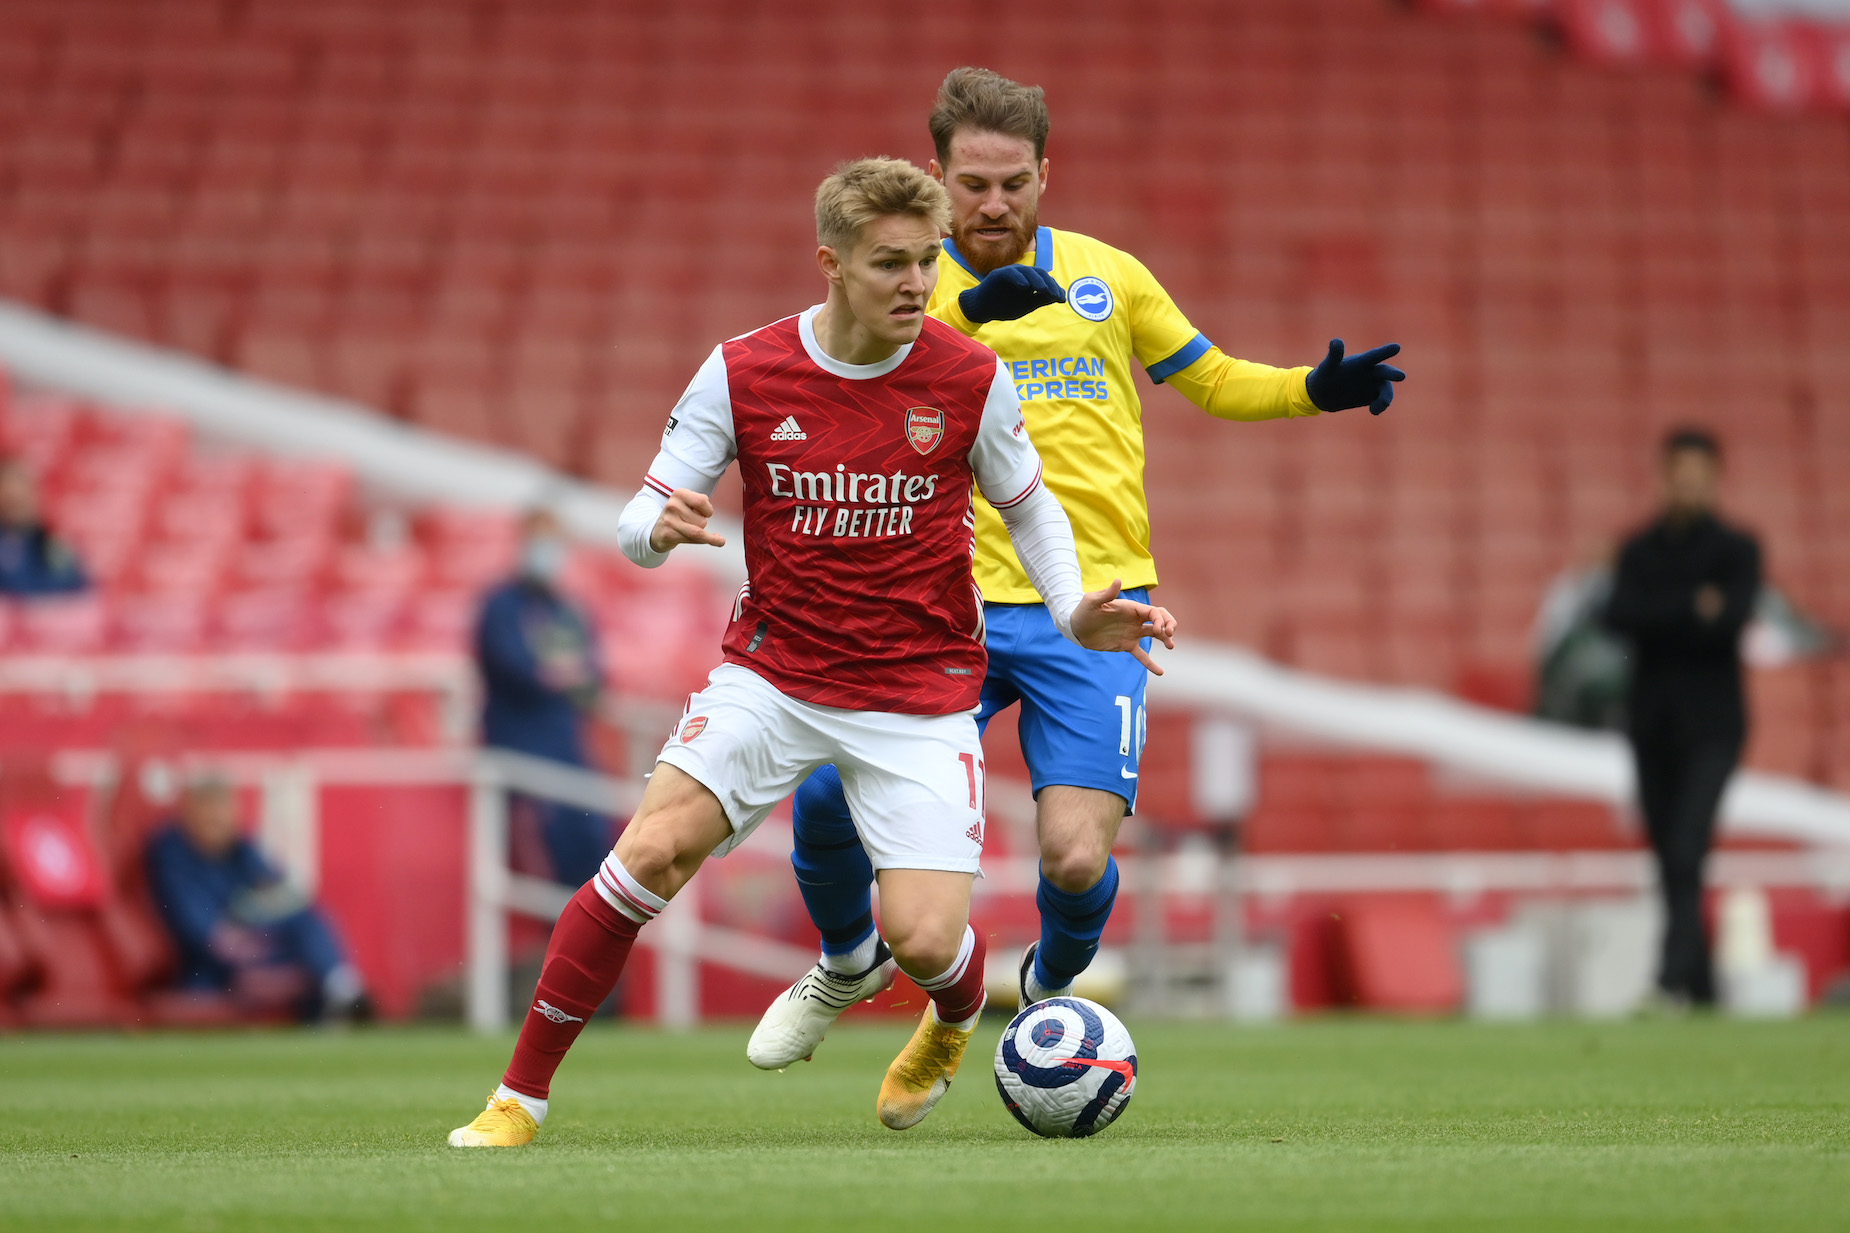 Martin Ødegaard dribbles past a Brighton defender during his time on loan at Arsenal